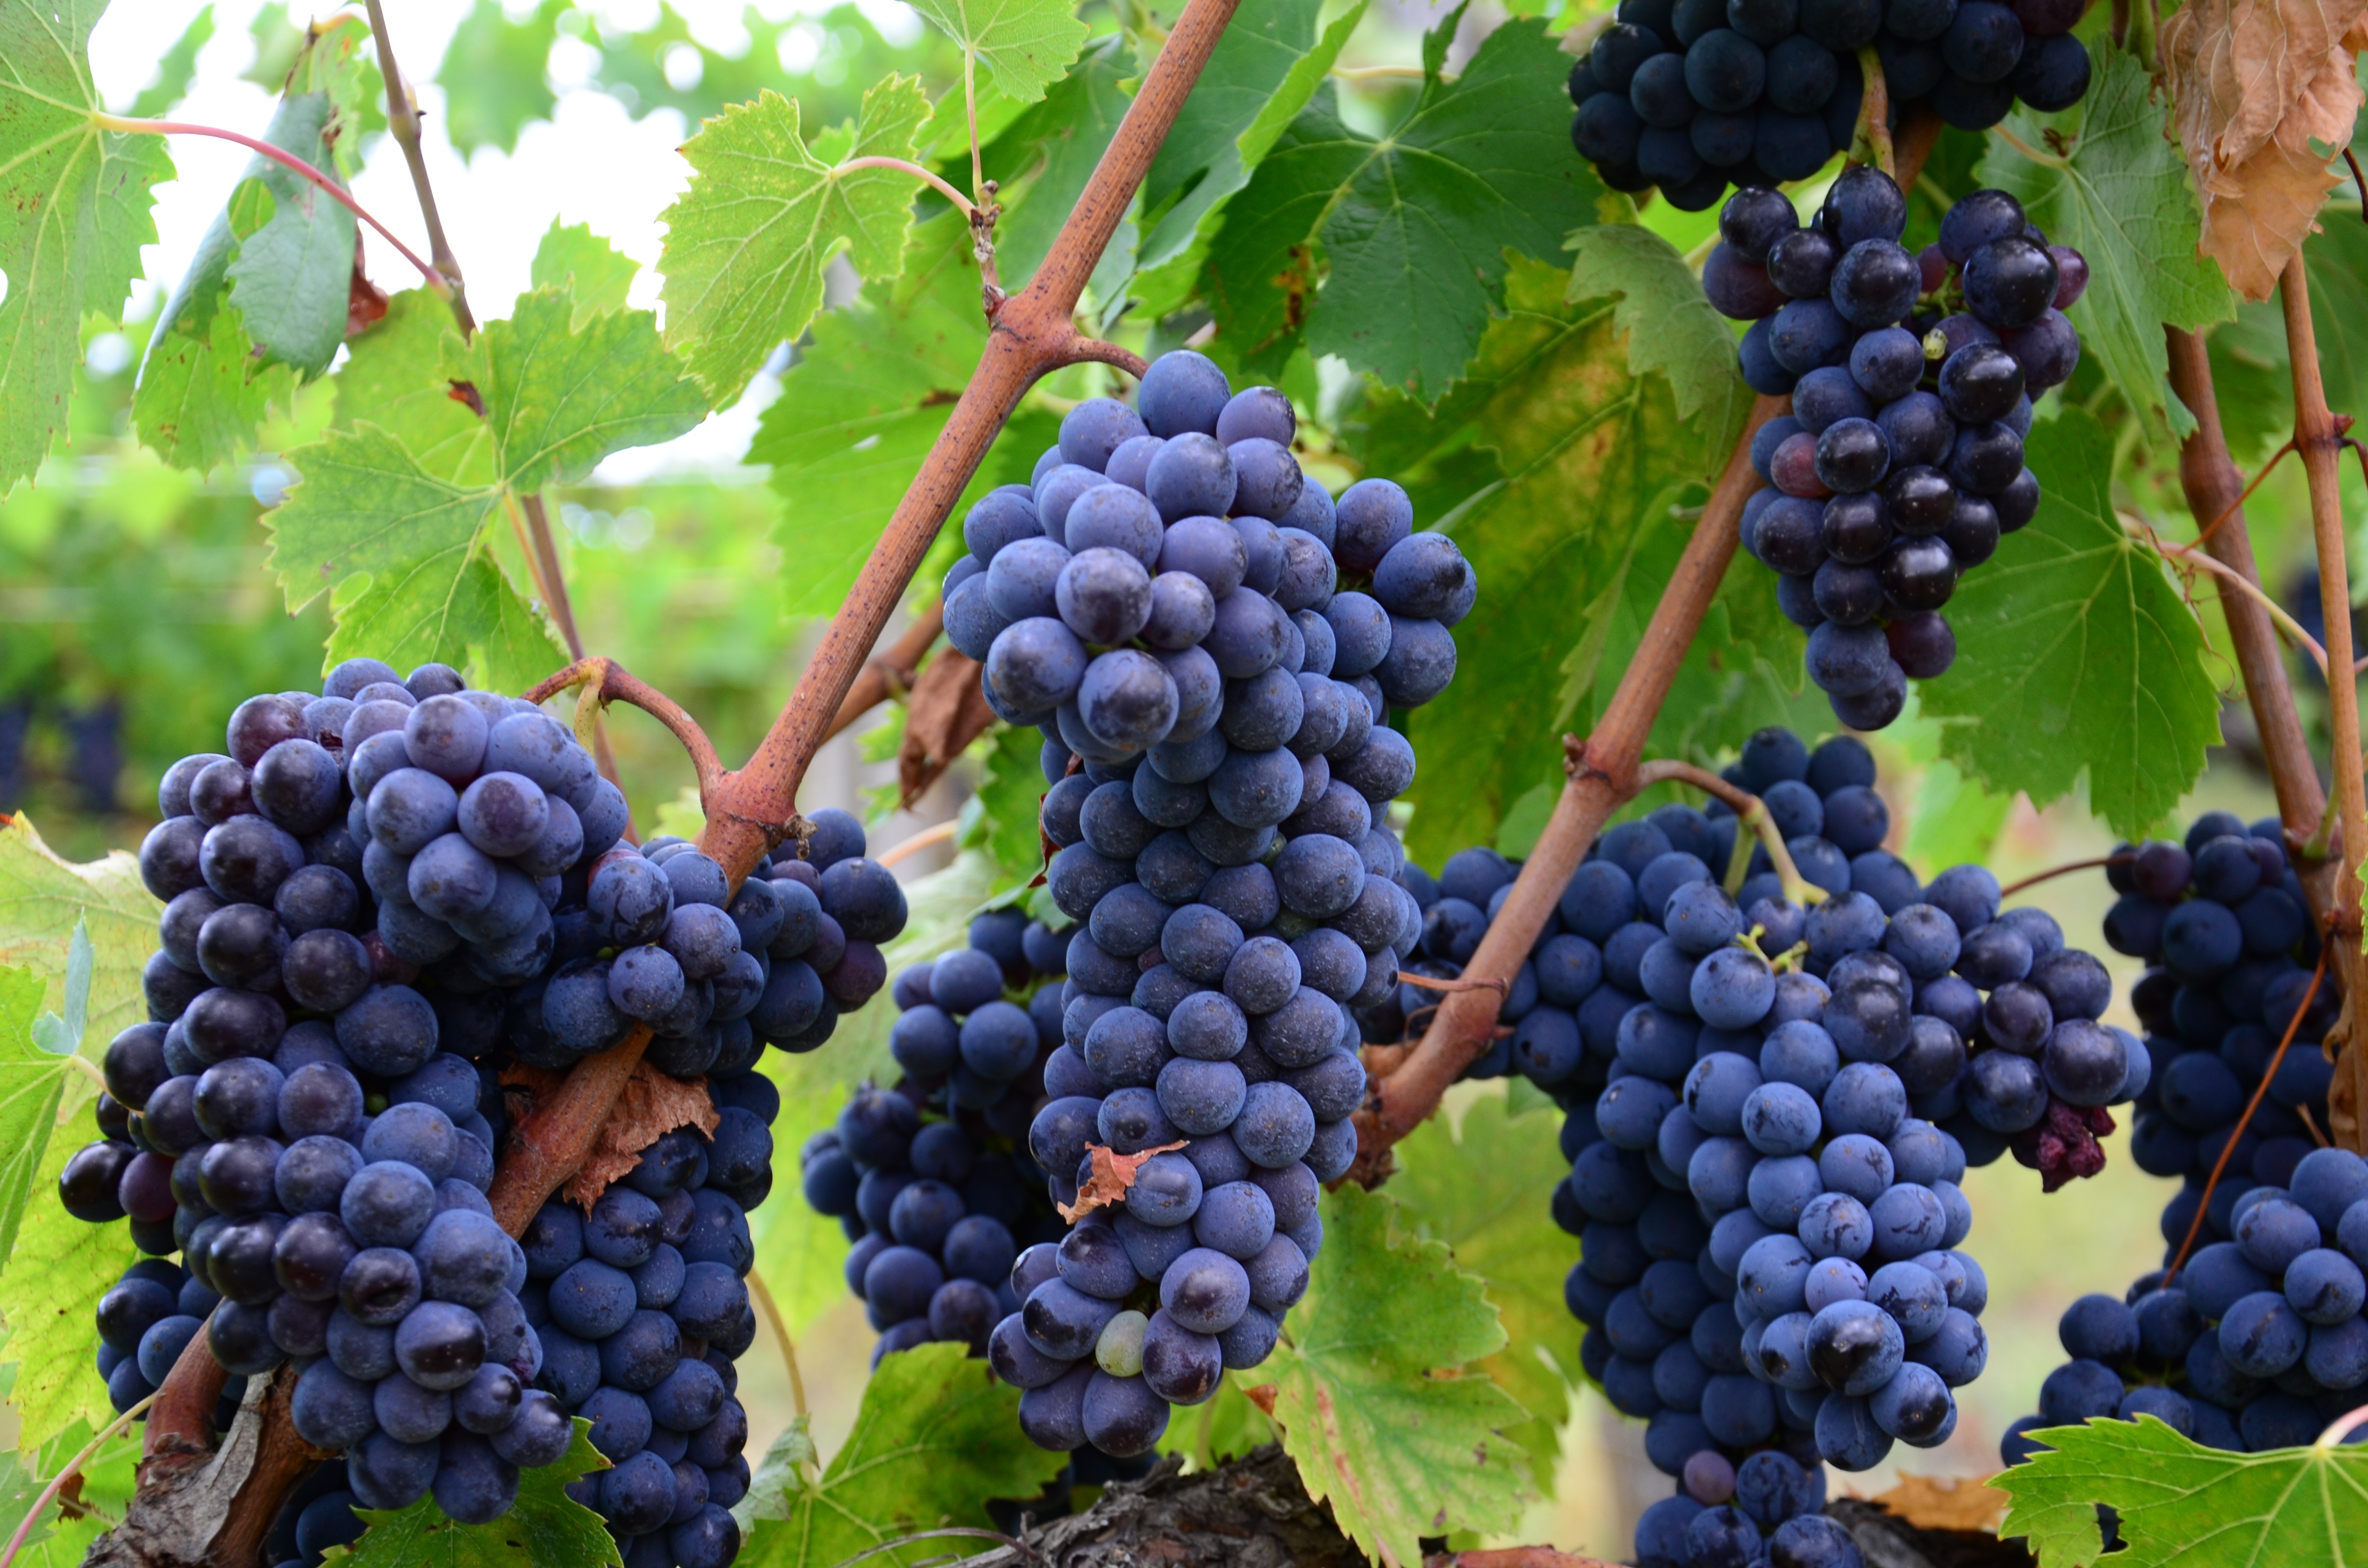 Clusters of blue grapes growing on a tree branch